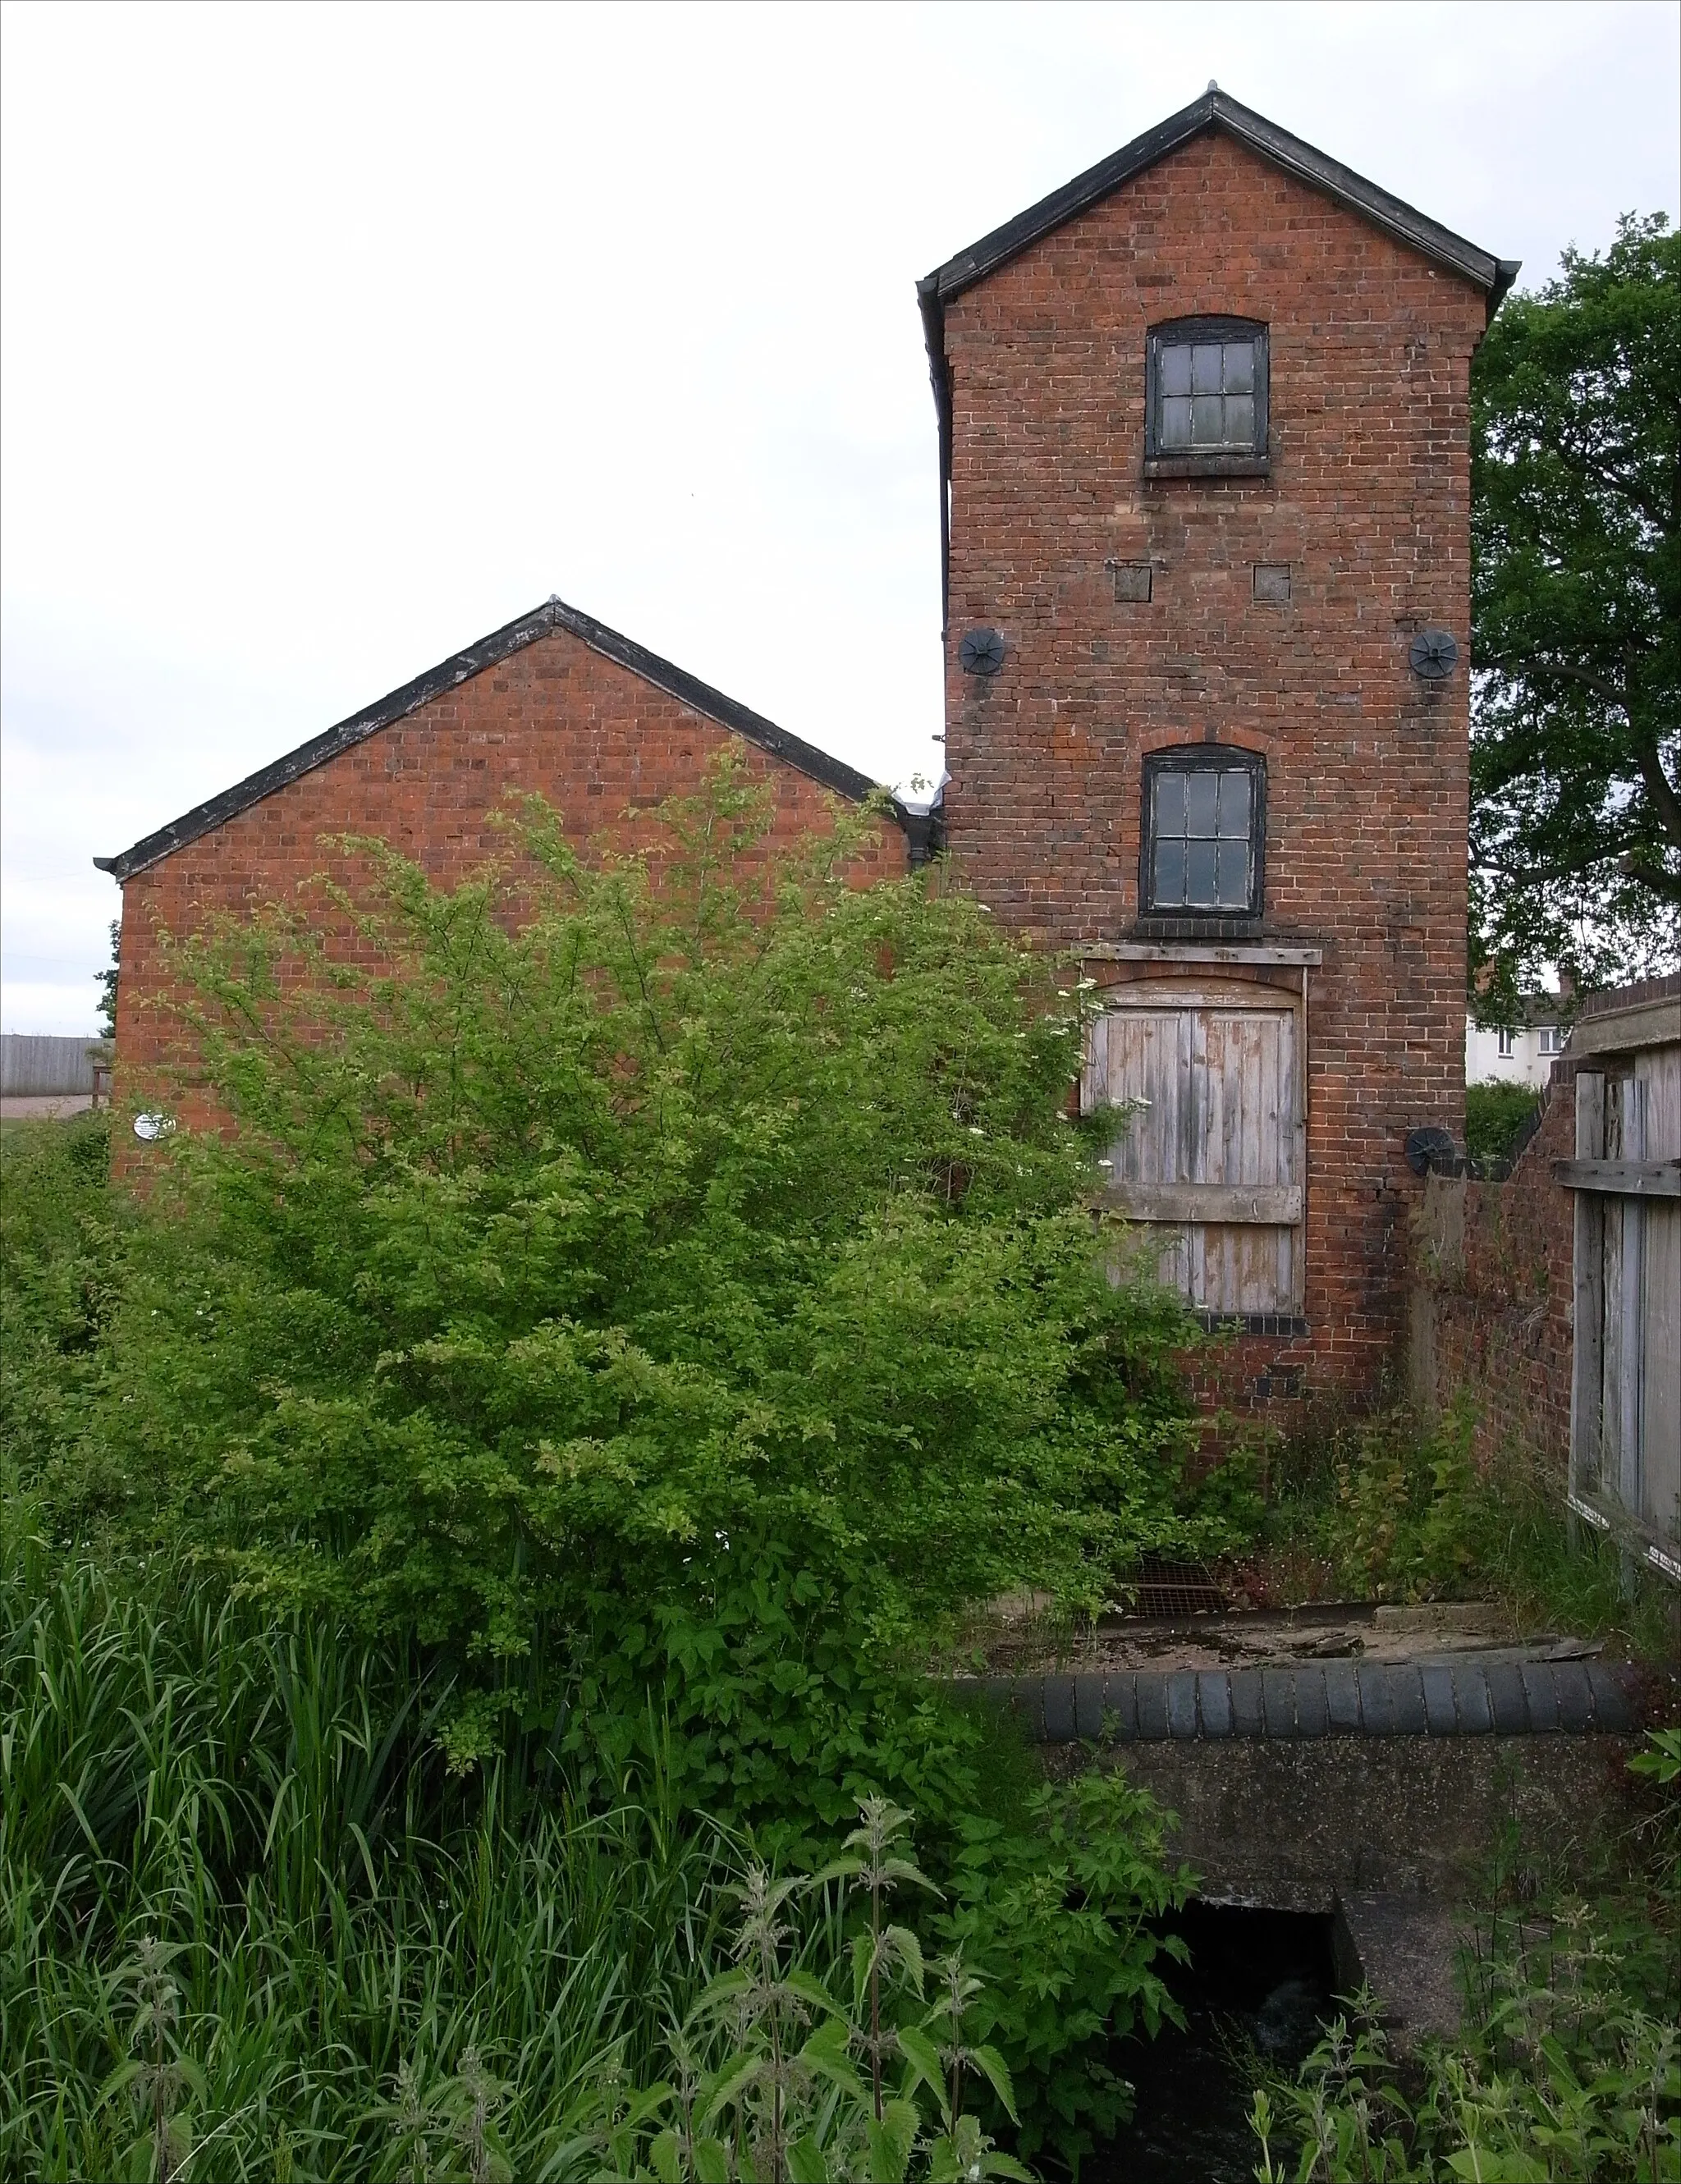 Photo showing: 1821 engine house at Earlswood Lakes, Earlswood, West Midlands (formerly Warwickshire). Used to pump water from the reservoirs to the Stratford-upon-Avon Canal.